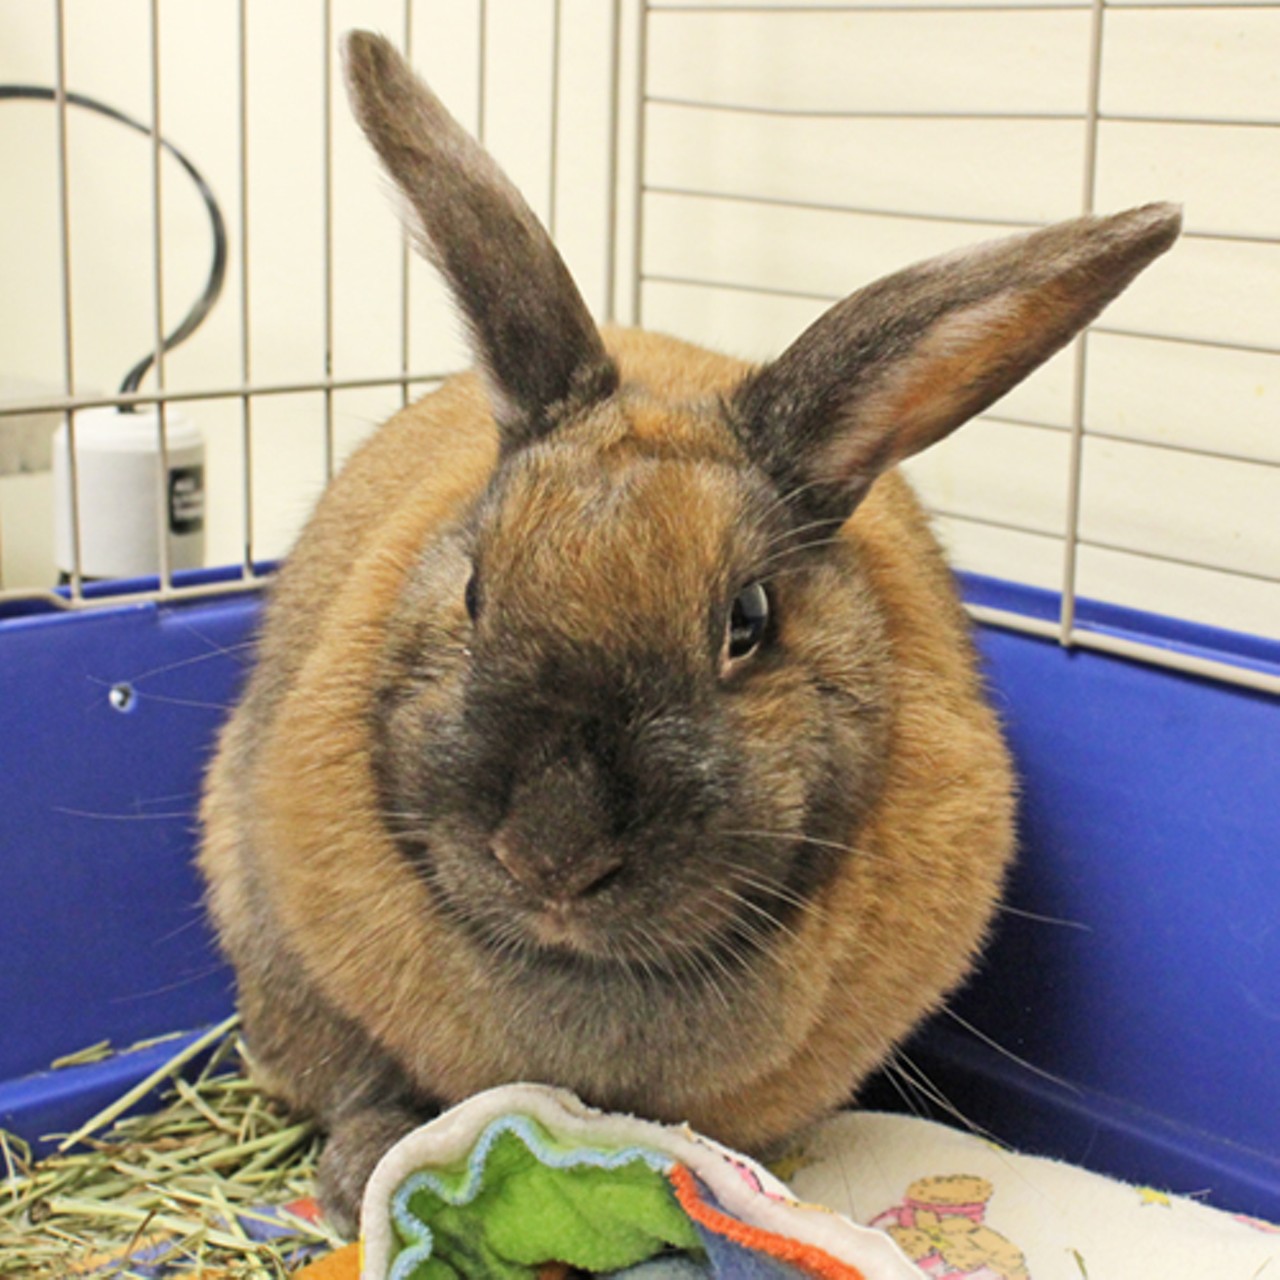 NAME: Cocoa 
GENDER: Female 
BREED: American Sable
AGE: 5 years, 10 months 
WEIGHT: 4 pounds
SPECIAL CONSIDERATIONS: None
REASON I CAME TO MHS: Owner surrender 
LOCATION: Berman Center for Animal Care in Westland 
ID NUMBER: 836268 